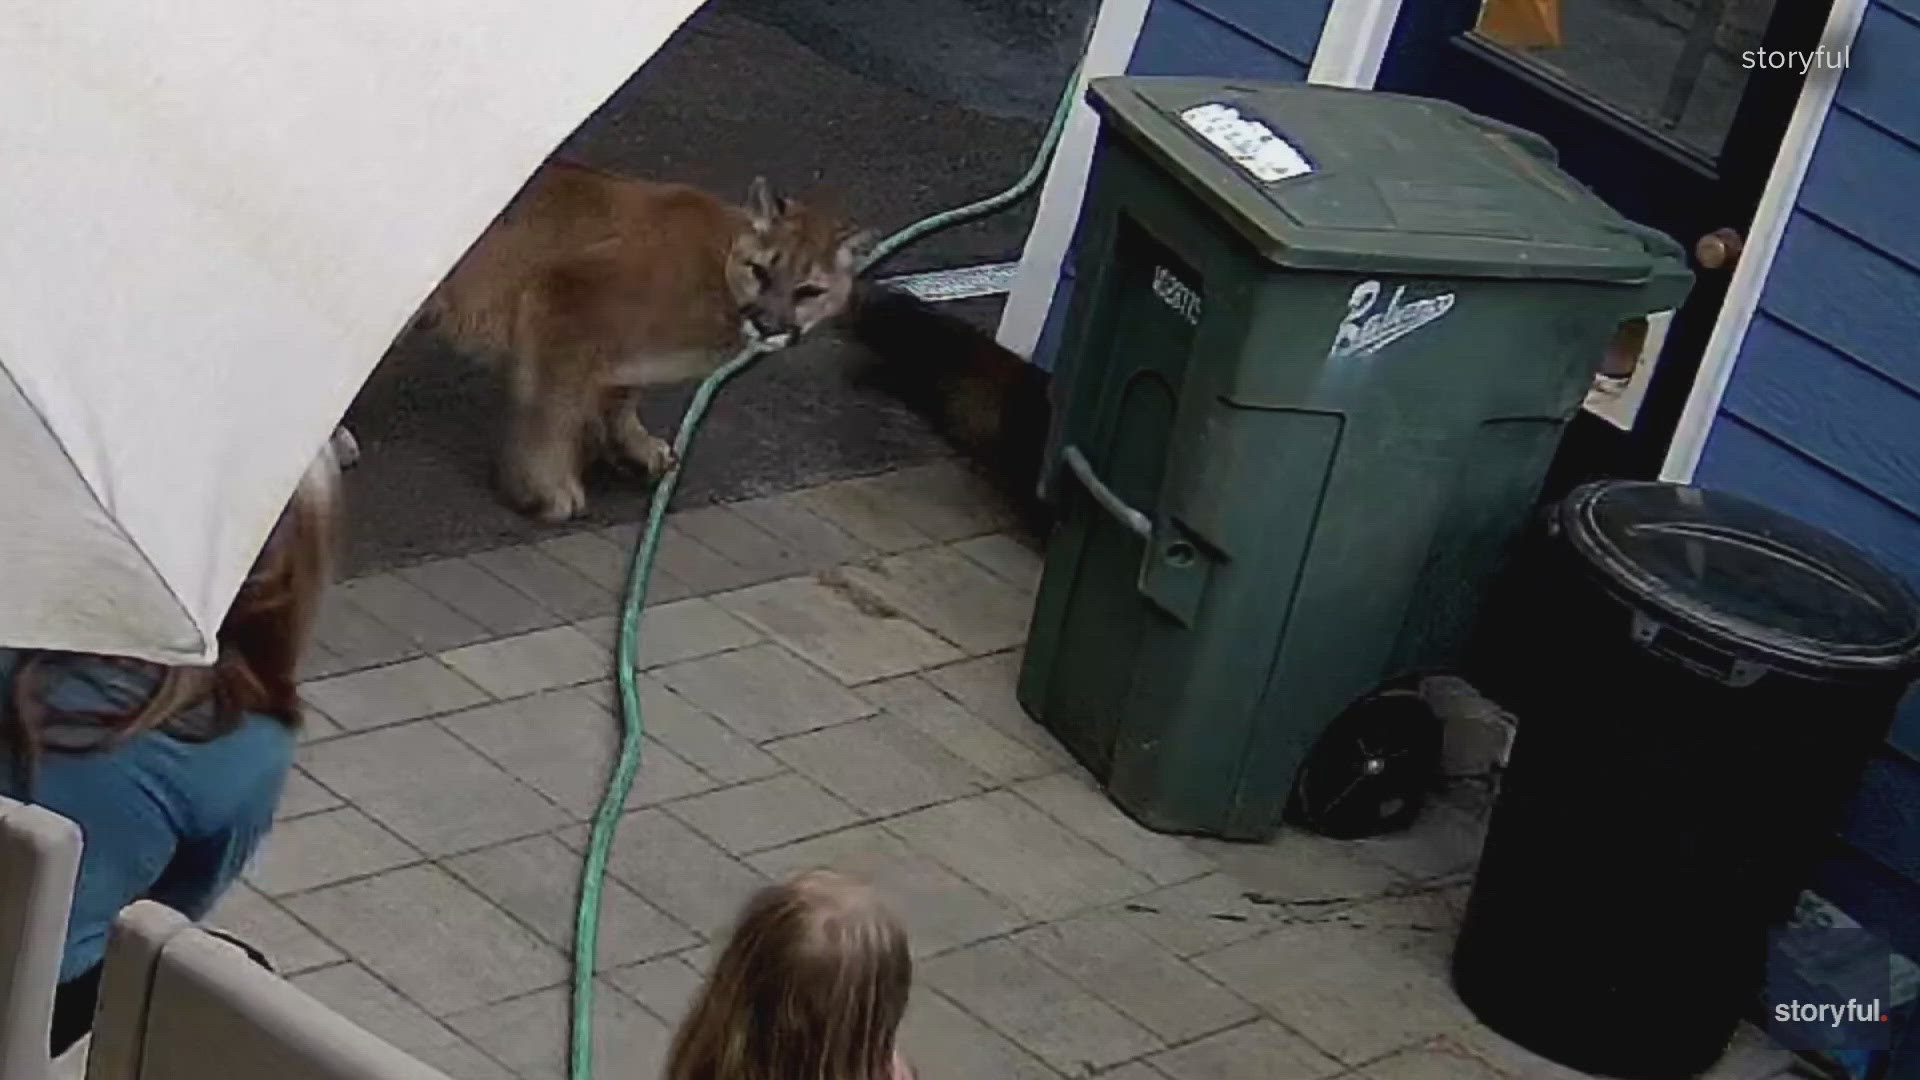 A family had a close encounter with a cougar over the weekend when the wild cat ran through their backyard and came within feet of the family.